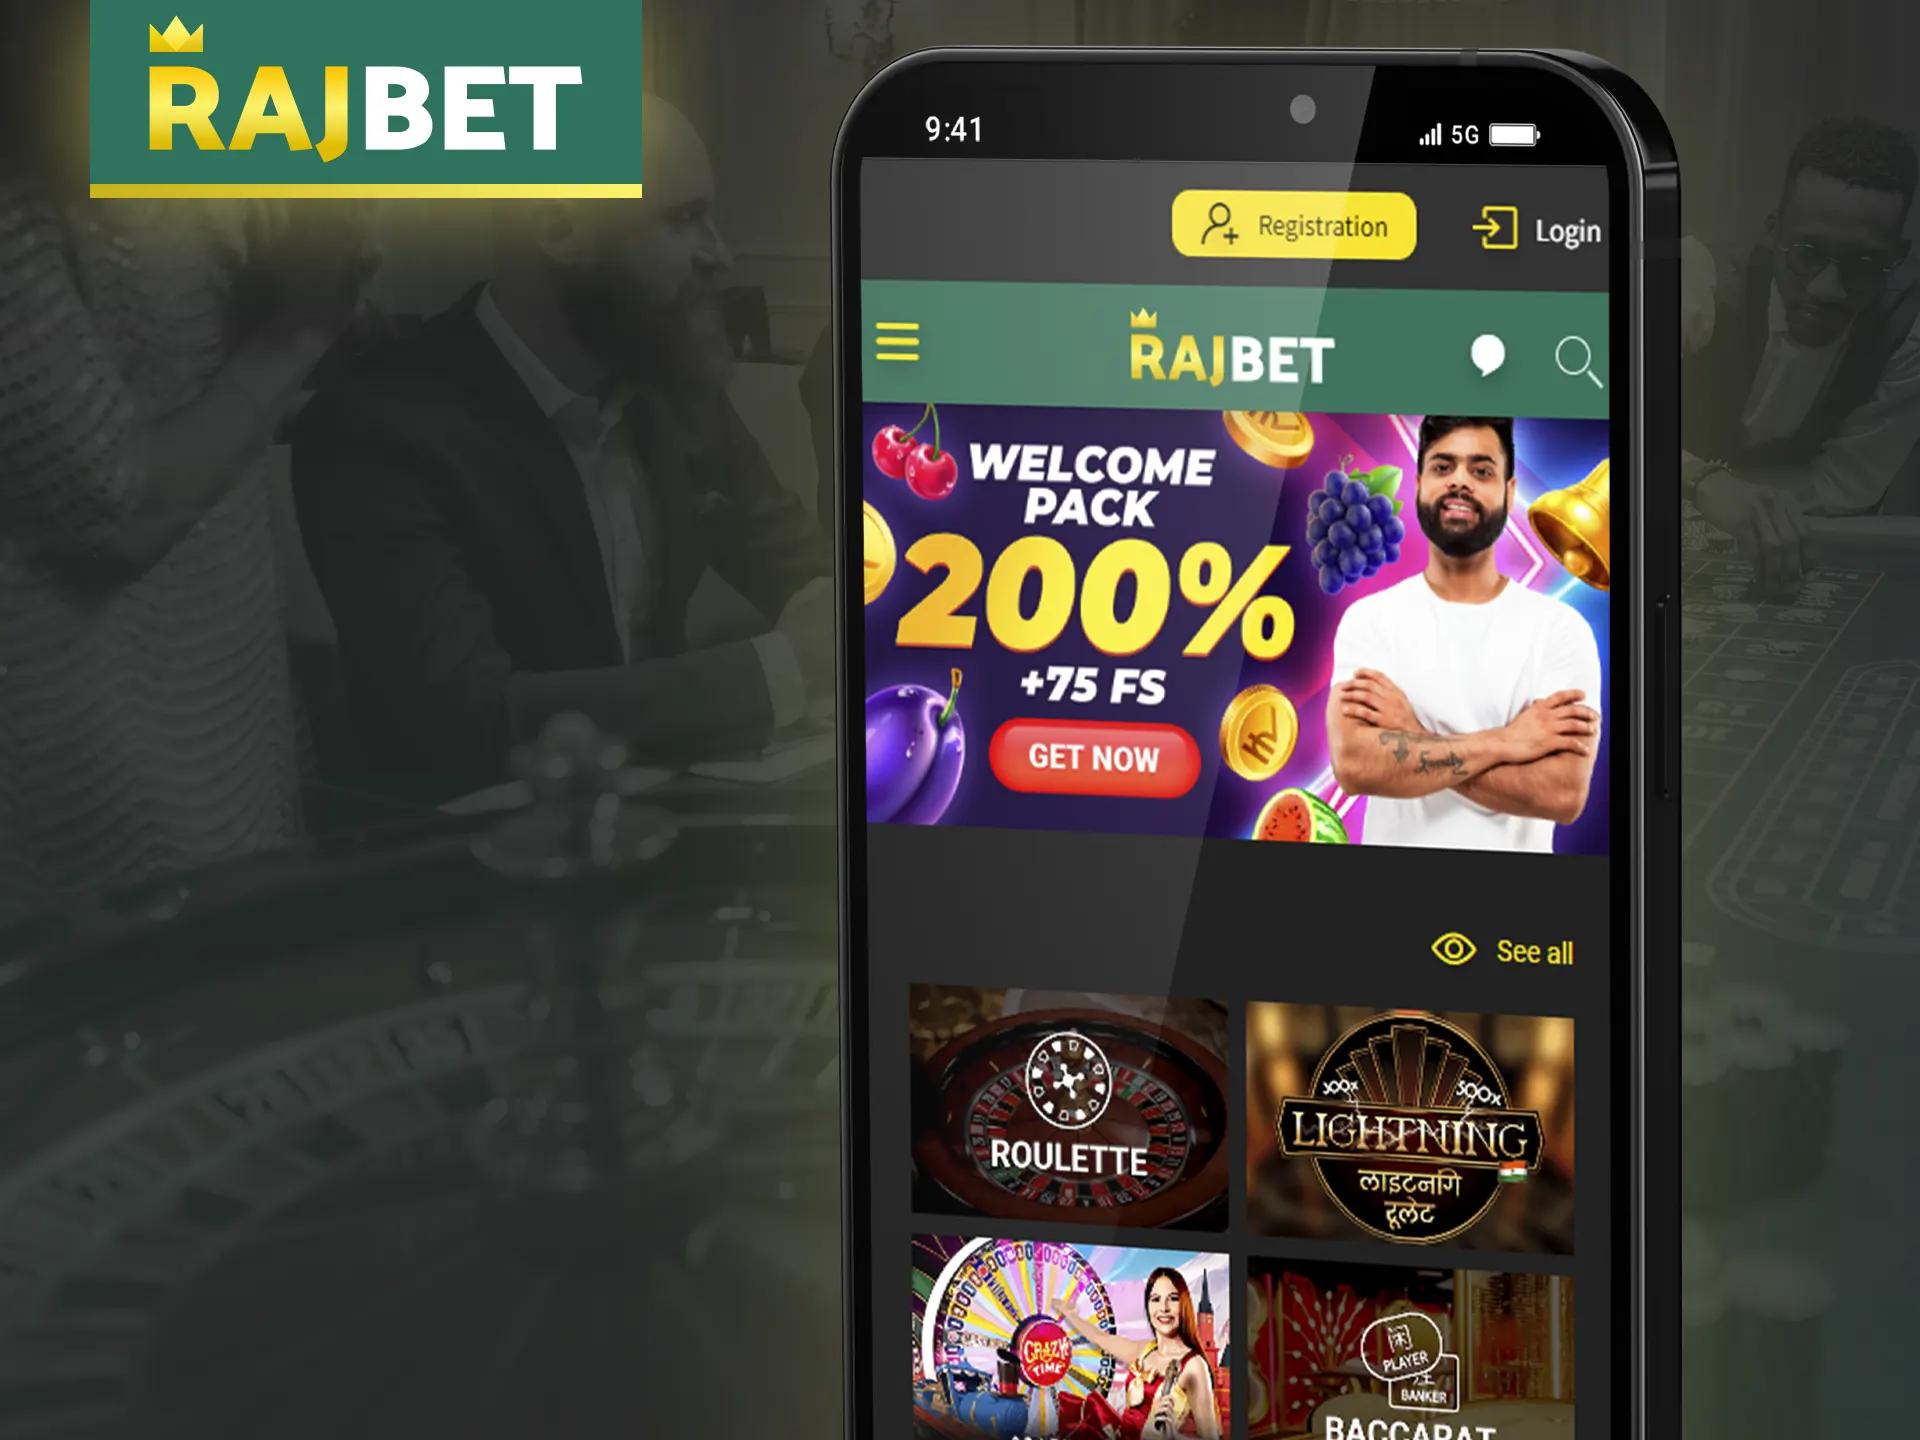 Use the mobile version of Rajbet's website.